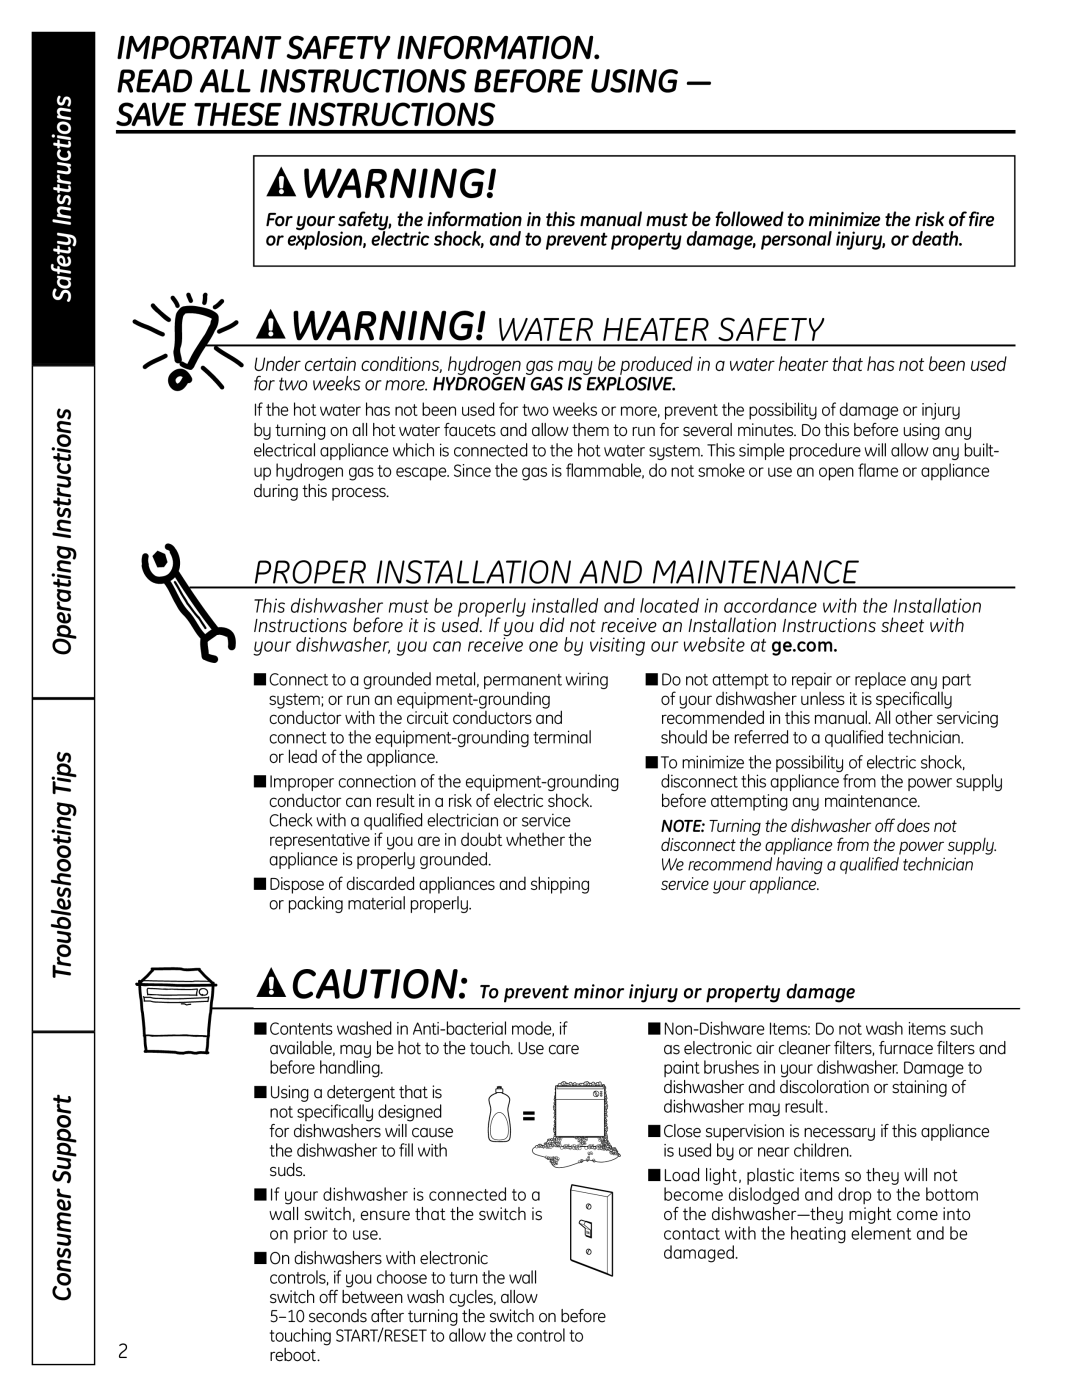 GE PDW8000 Important Safety Information Read All Instructions Before Using, Save These Instructions, Safety Instructions 